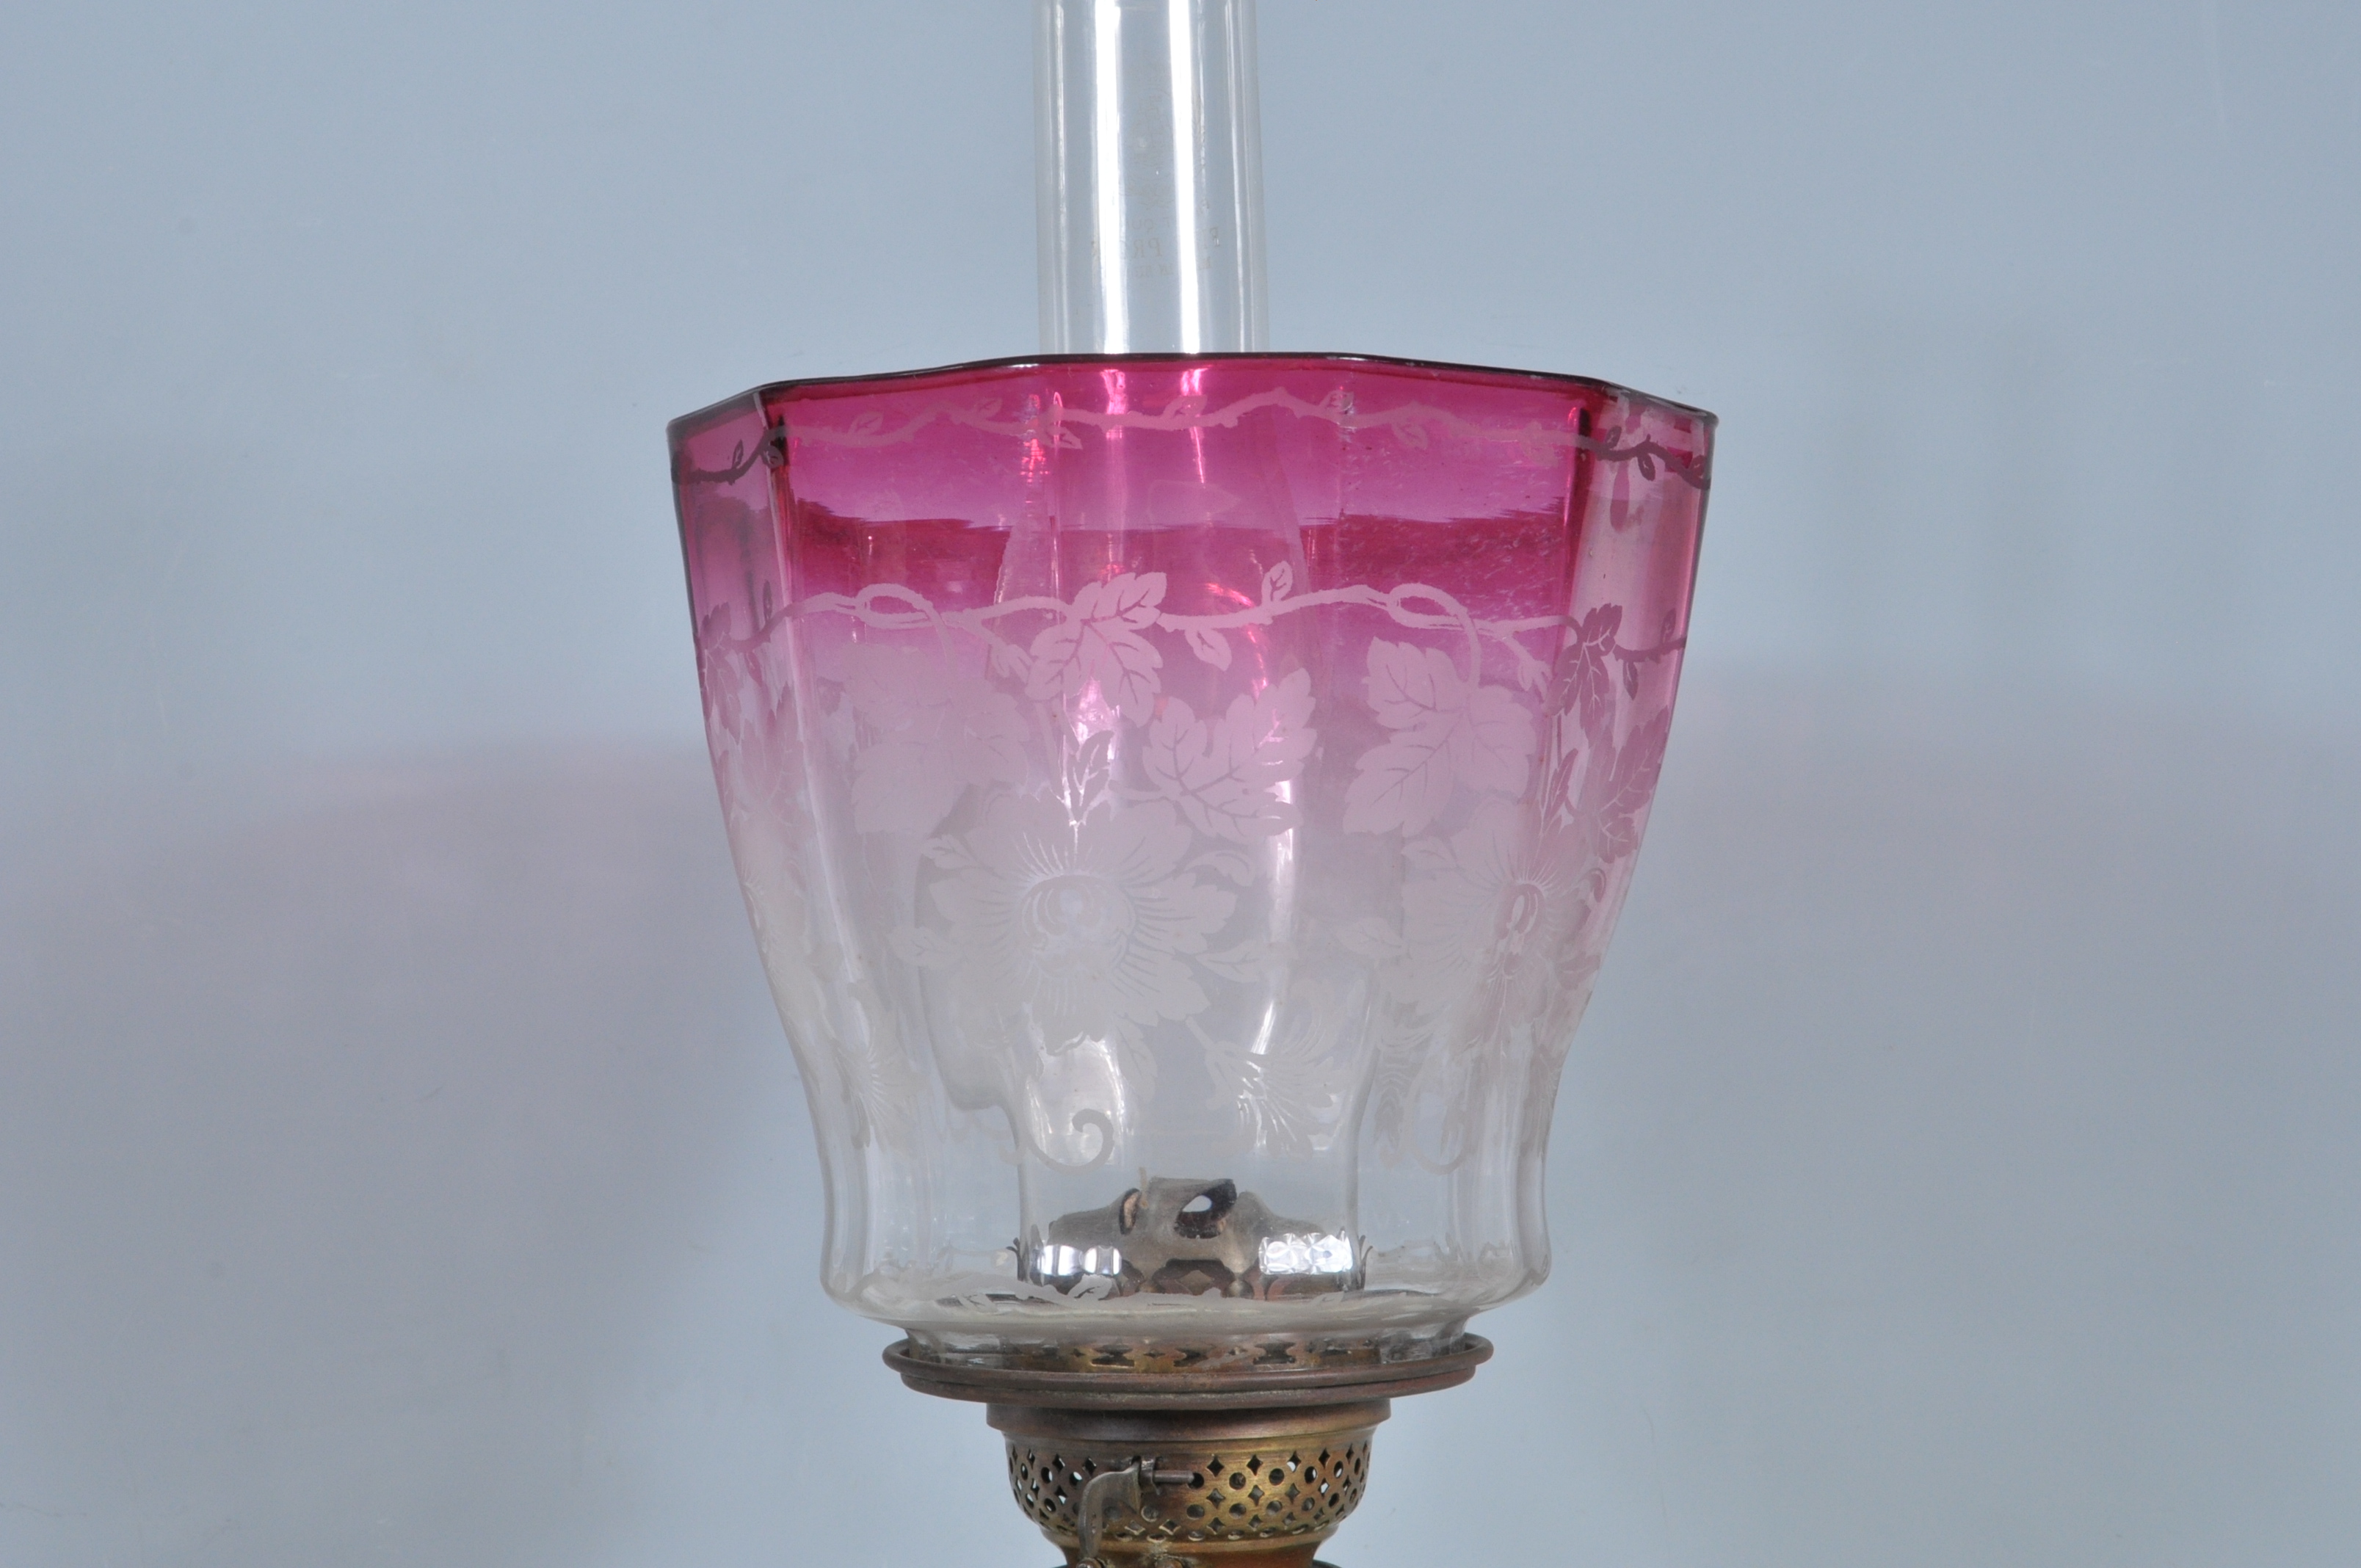 LATE 19TH CENTURY VICTORIAN CRANBERRY GLASS OIL LAMP - Image 6 of 8